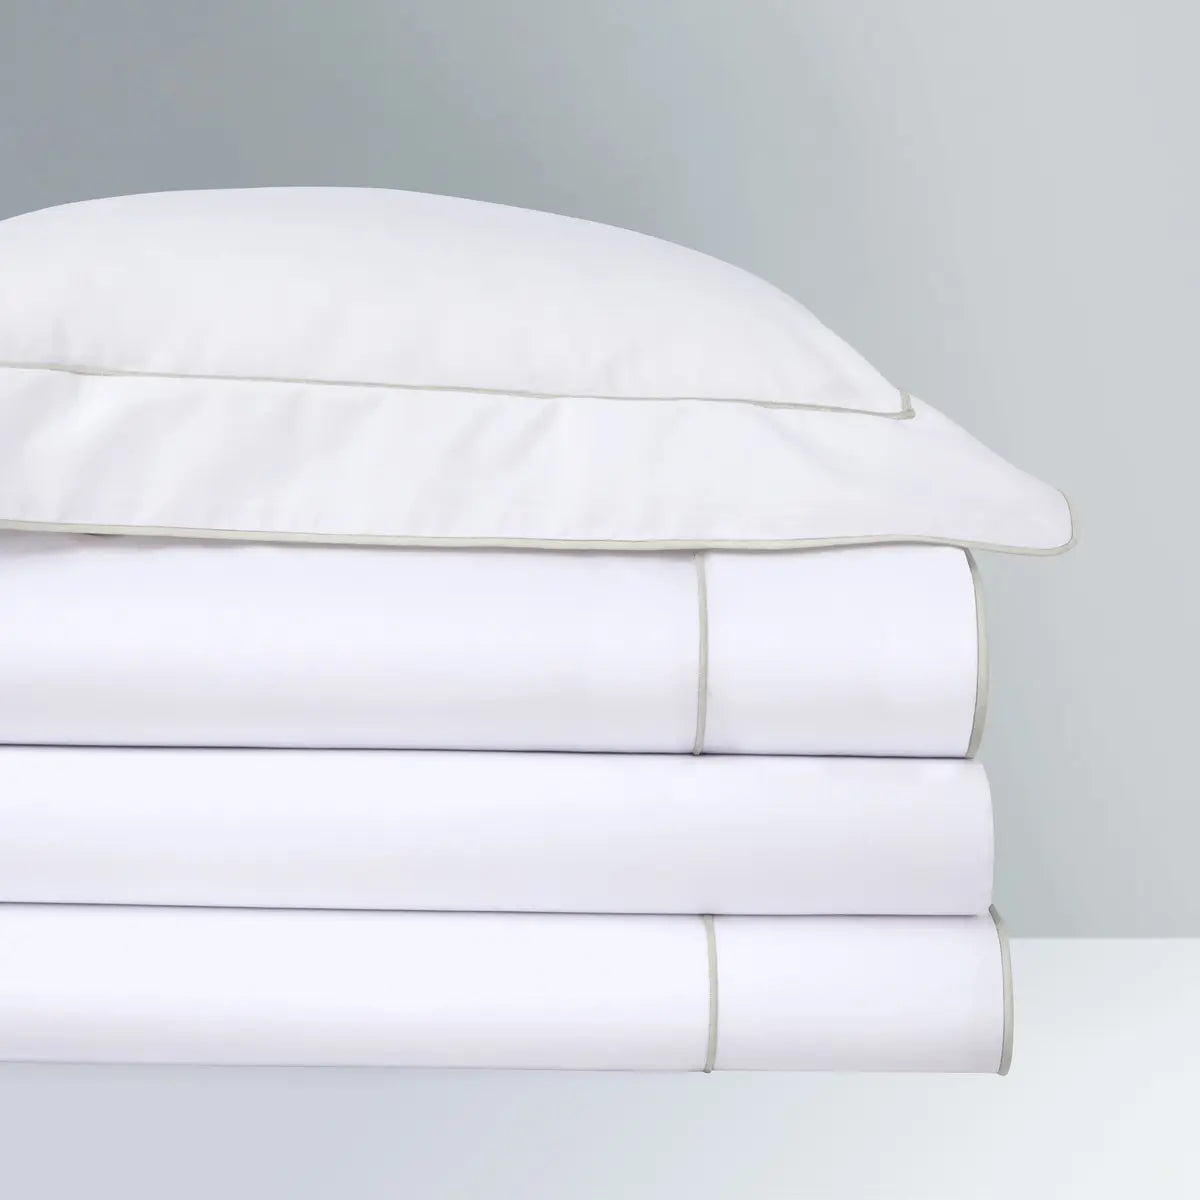 Yves Delorme Flandre Sheet and Pillowcase - Pierre stacked together